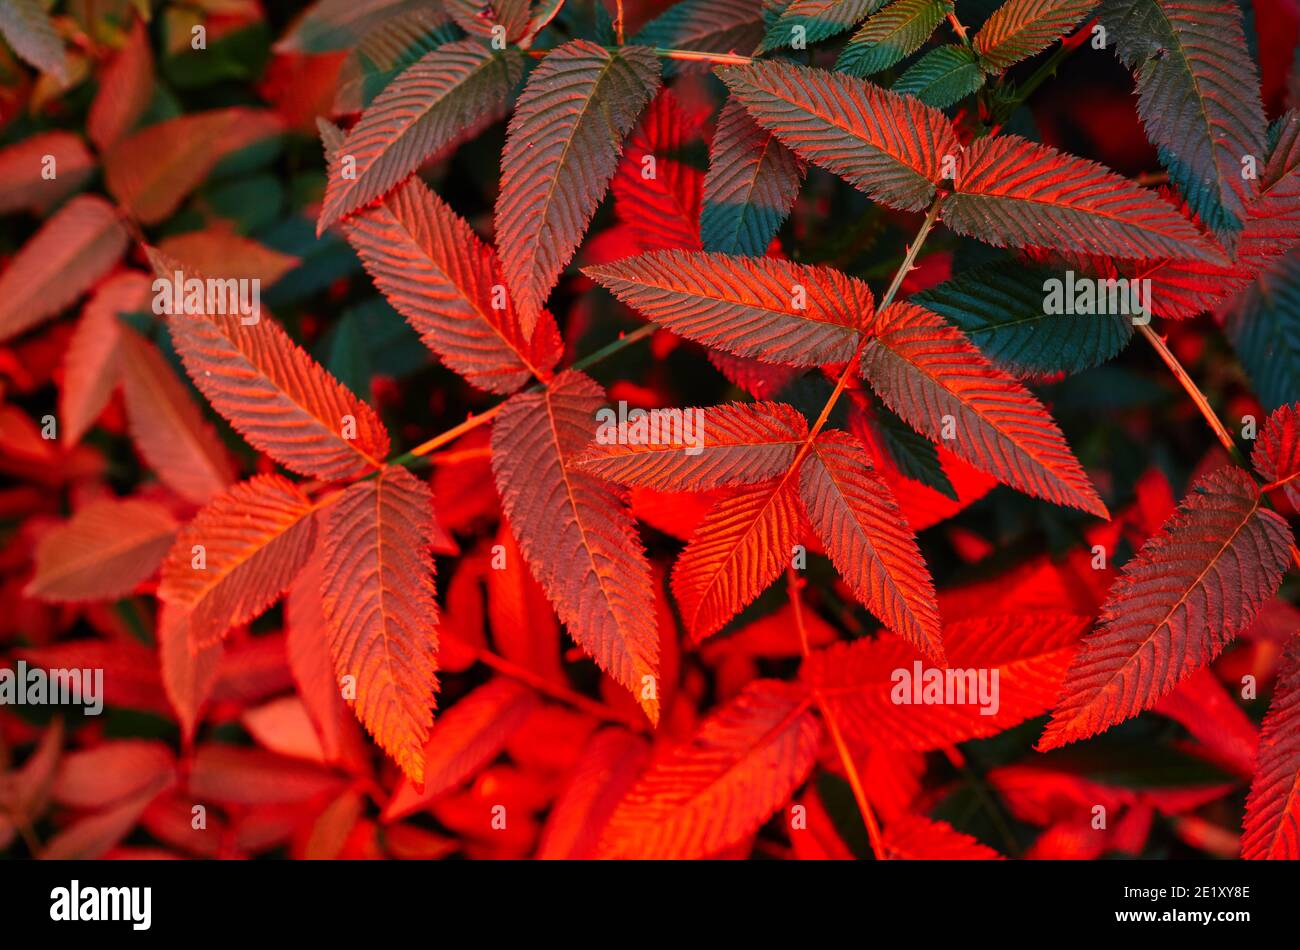 Abstract image of Rubus rosaefolius Miao miao leaves in the garden. Roseleaf raspberry (hybrid of raspberry and strawberry) Stock Photo